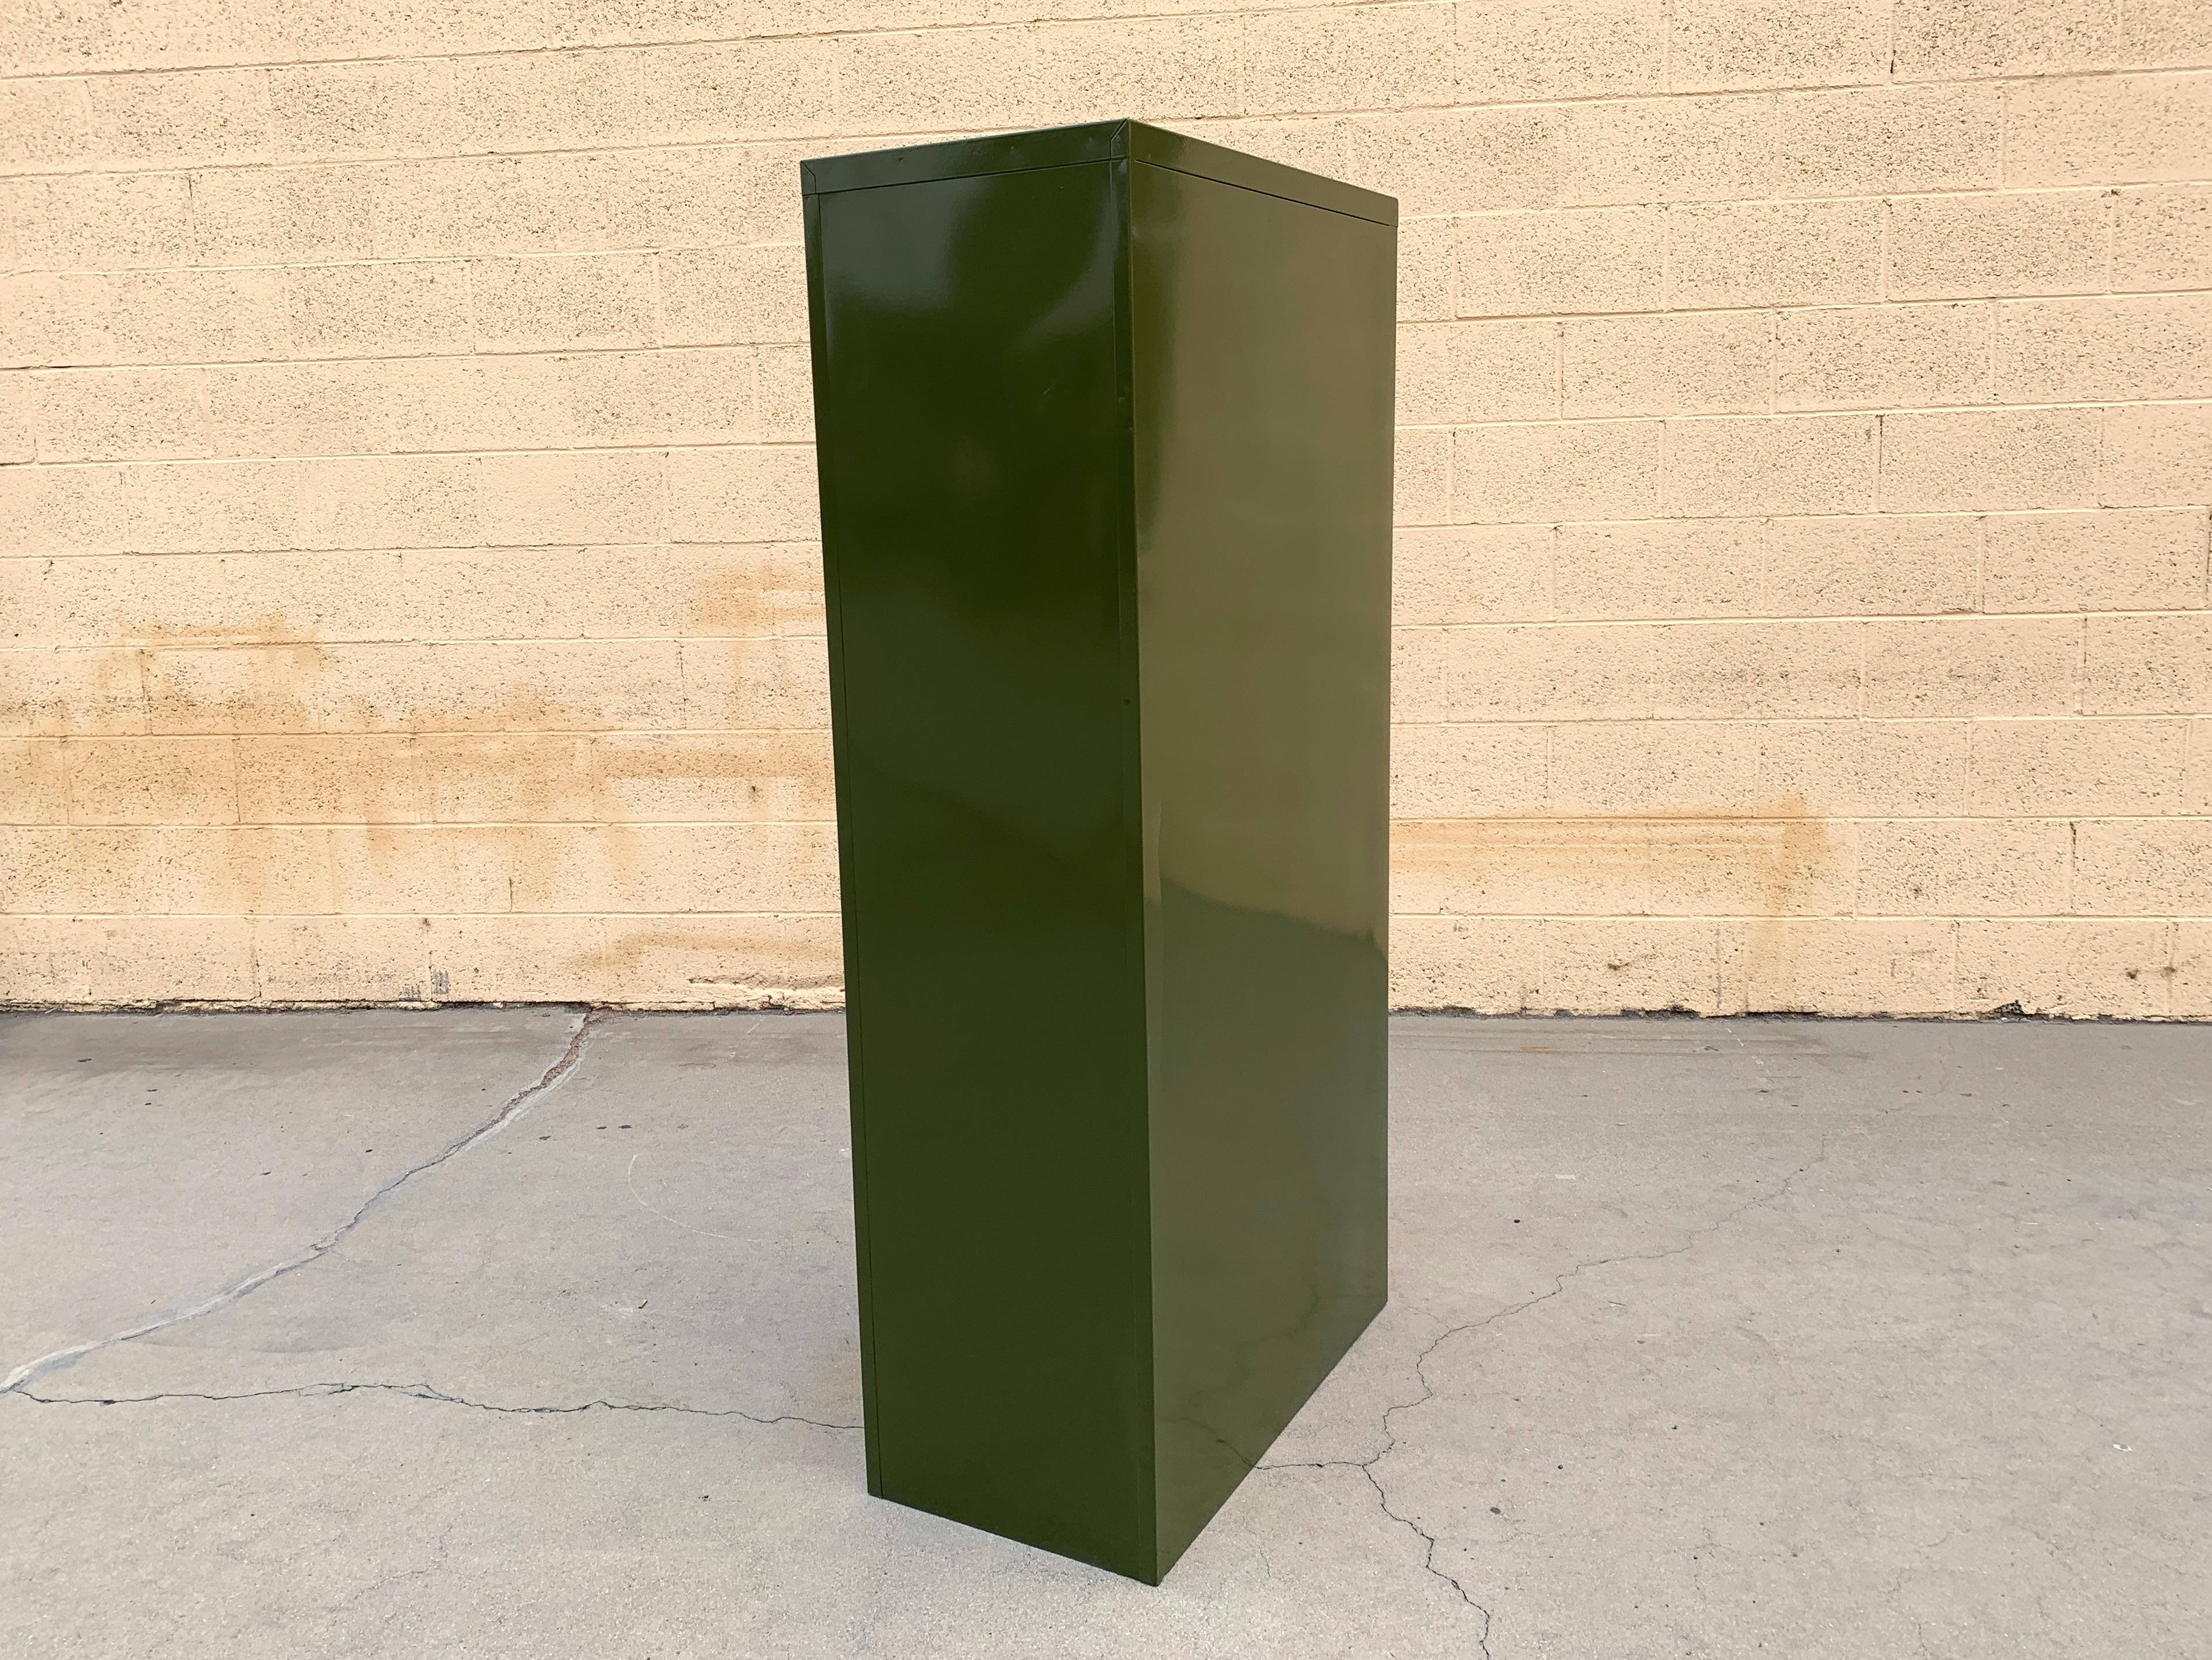 Midcentury Steelcase File Cabinet, Refinished in Pearl and Army Green In Good Condition For Sale In Alhambra, CA